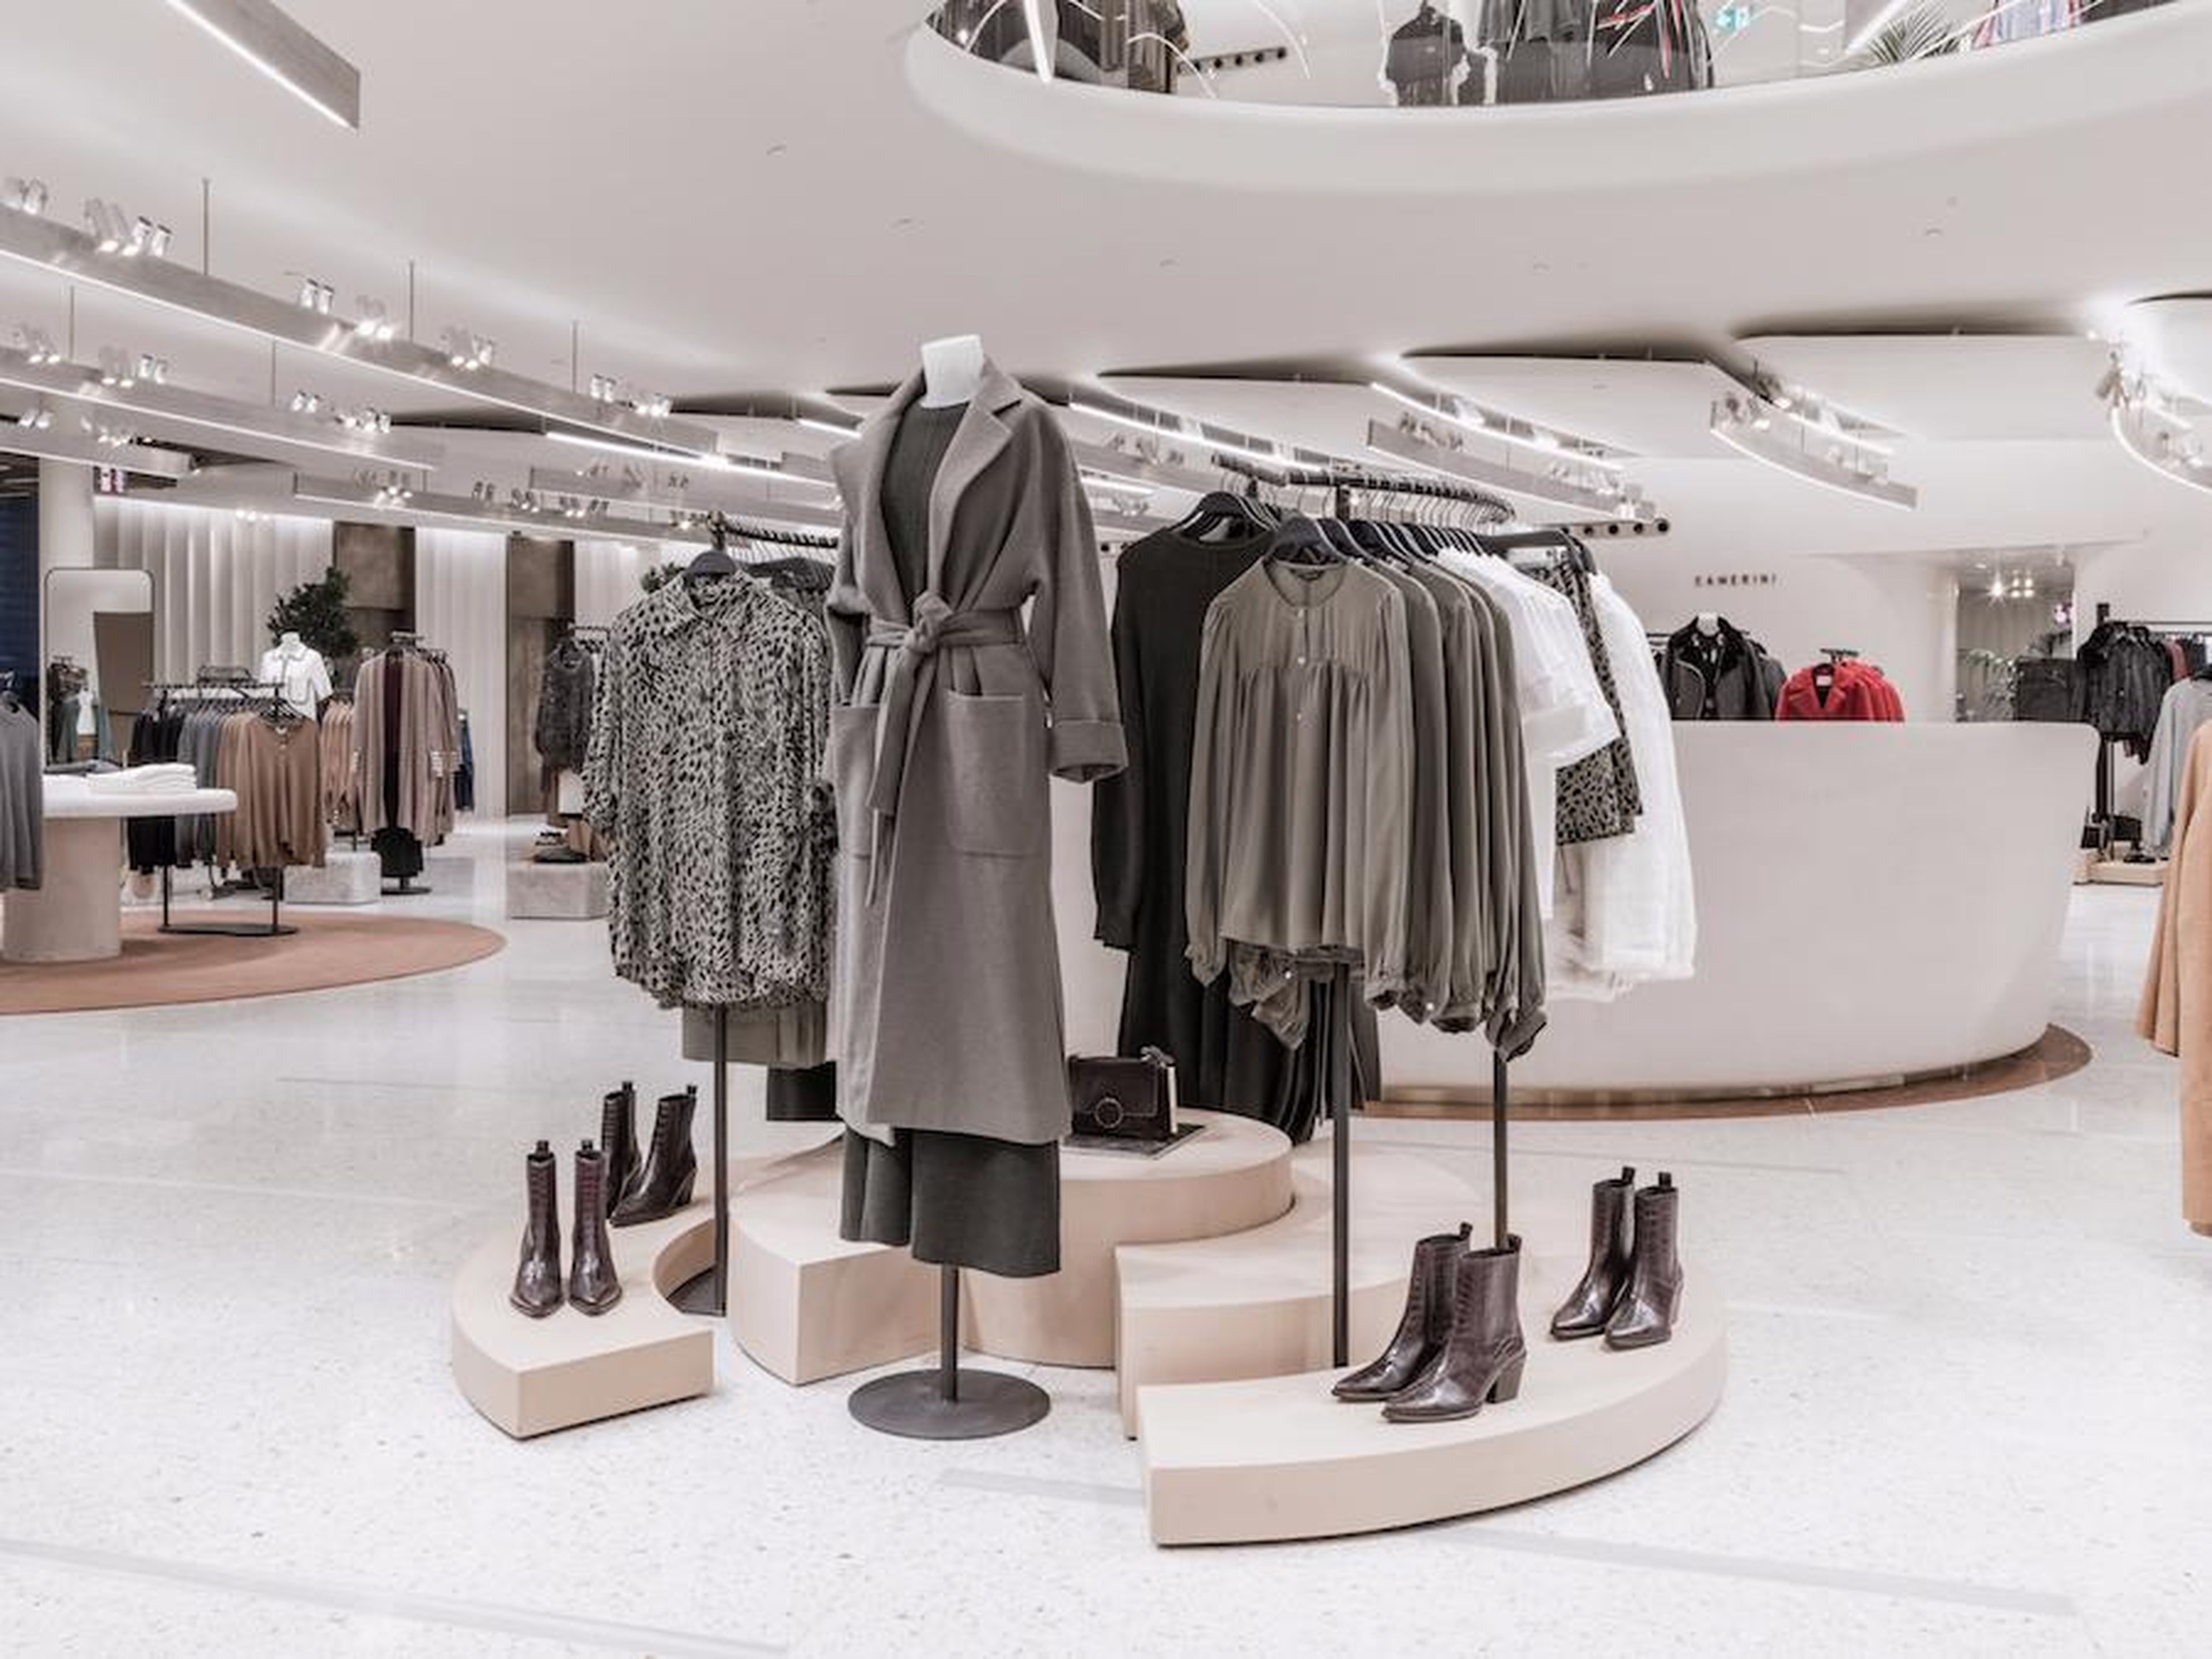 Zara has grown in popularity because of its ability to jump on trends quickly. It has often been accused of crossing the line between being inspired by a catwalk show or designer and actually copying them. This photograph shows a Zara store in Milan.